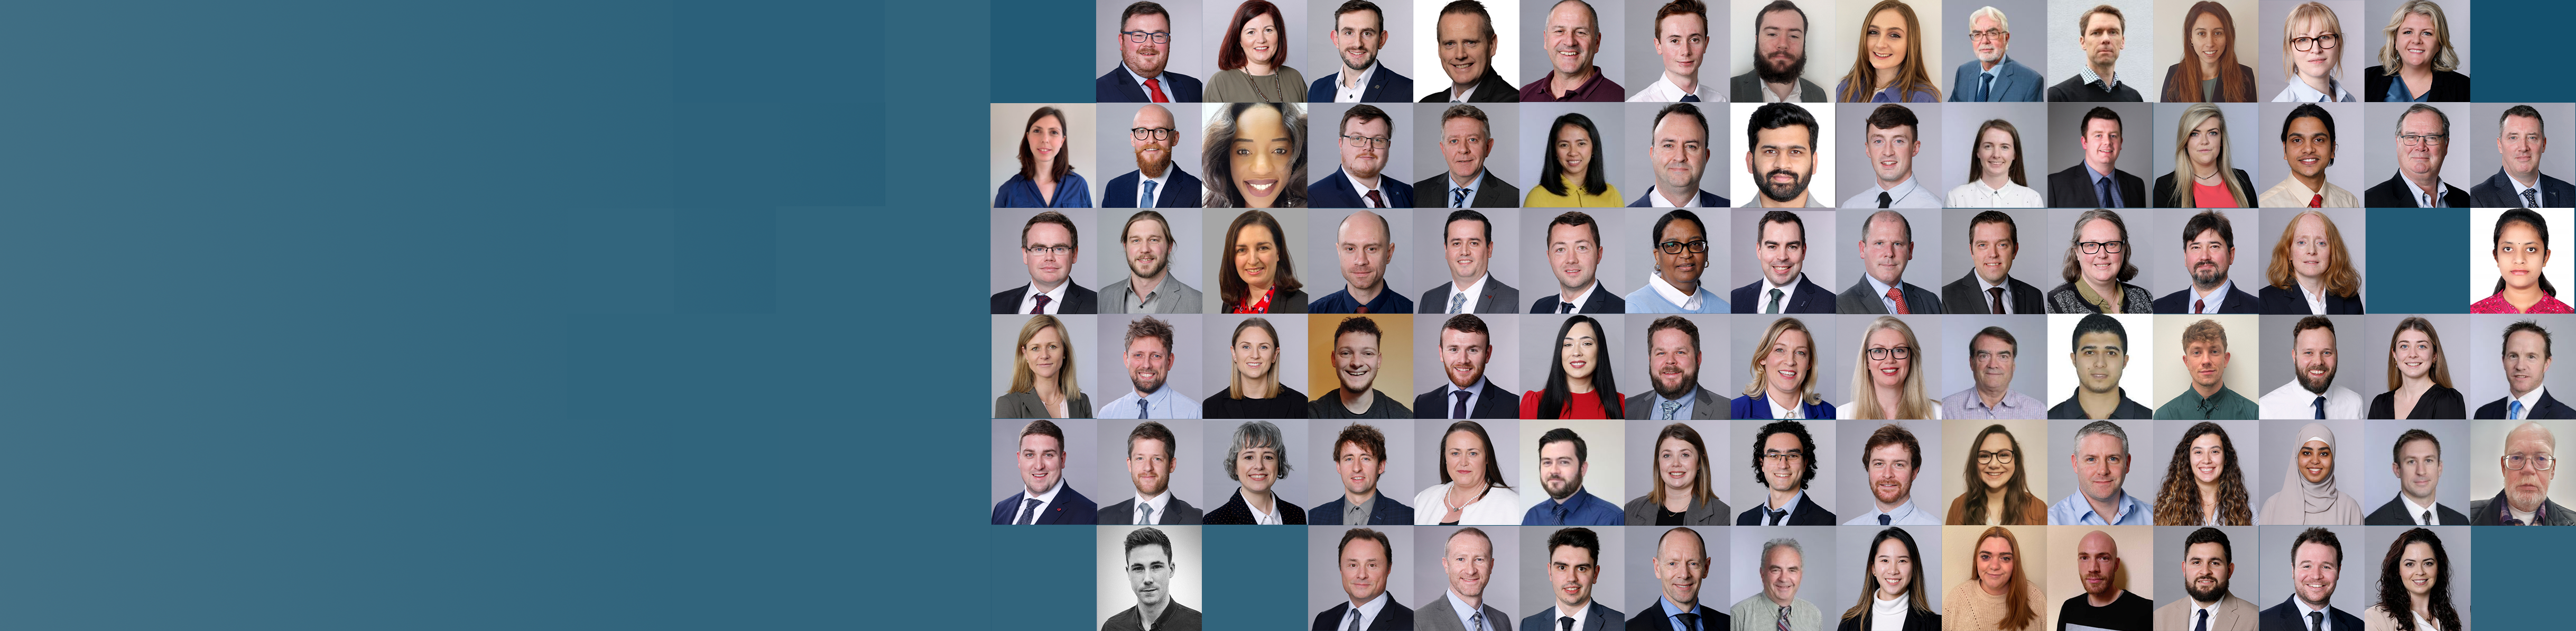 Collage of staff photos